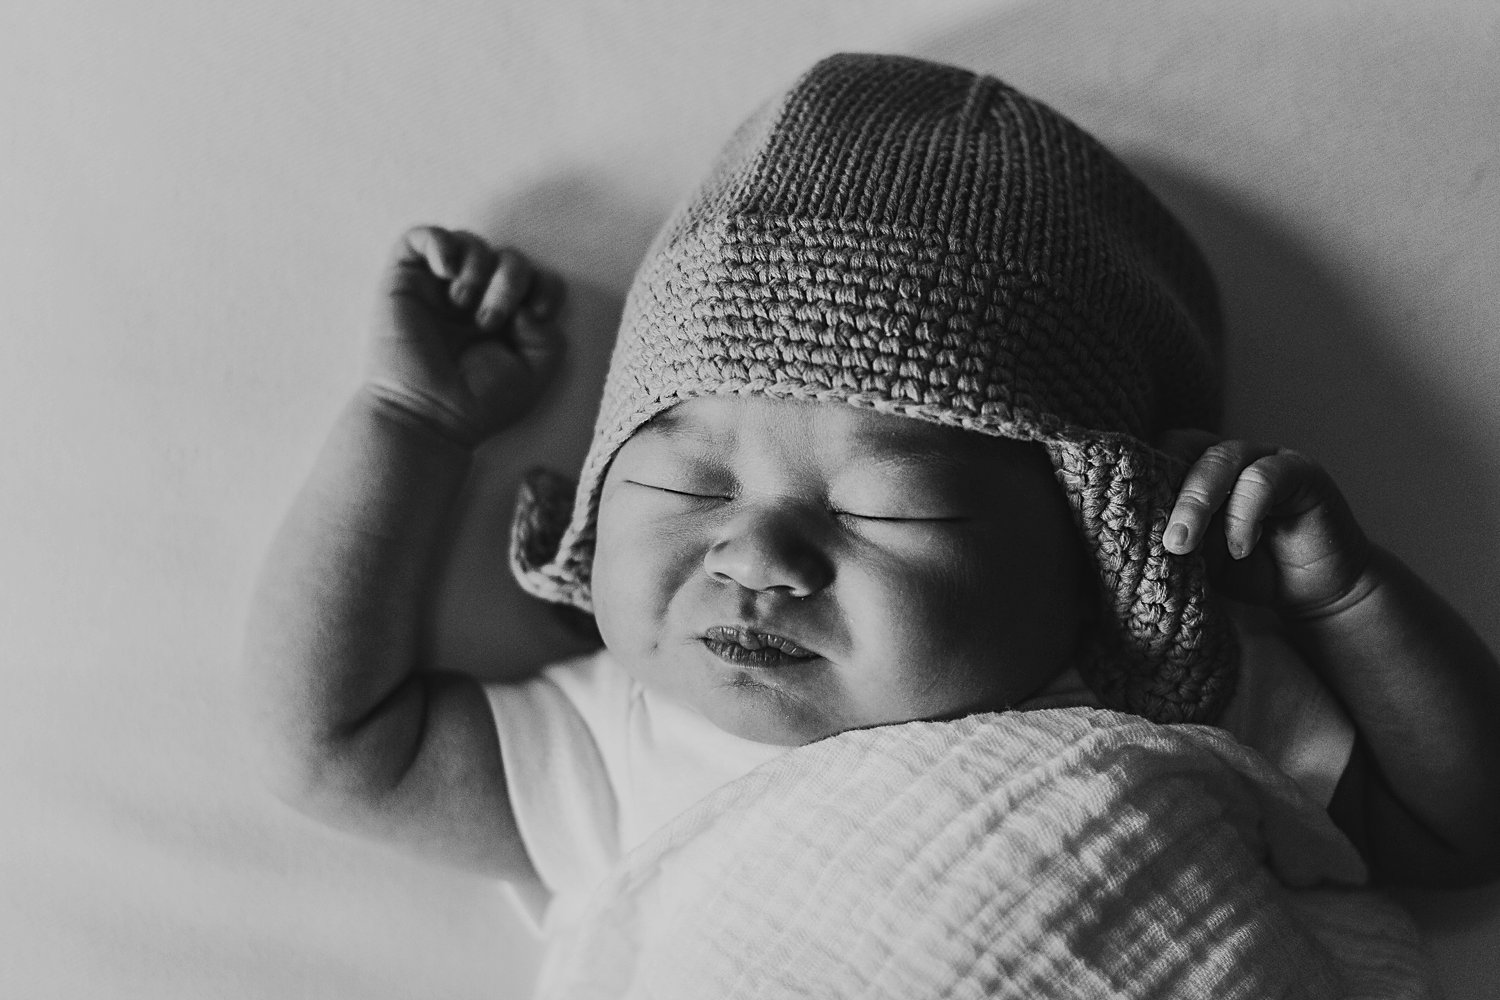 Newborn baby swaddled wearing hat and stretching